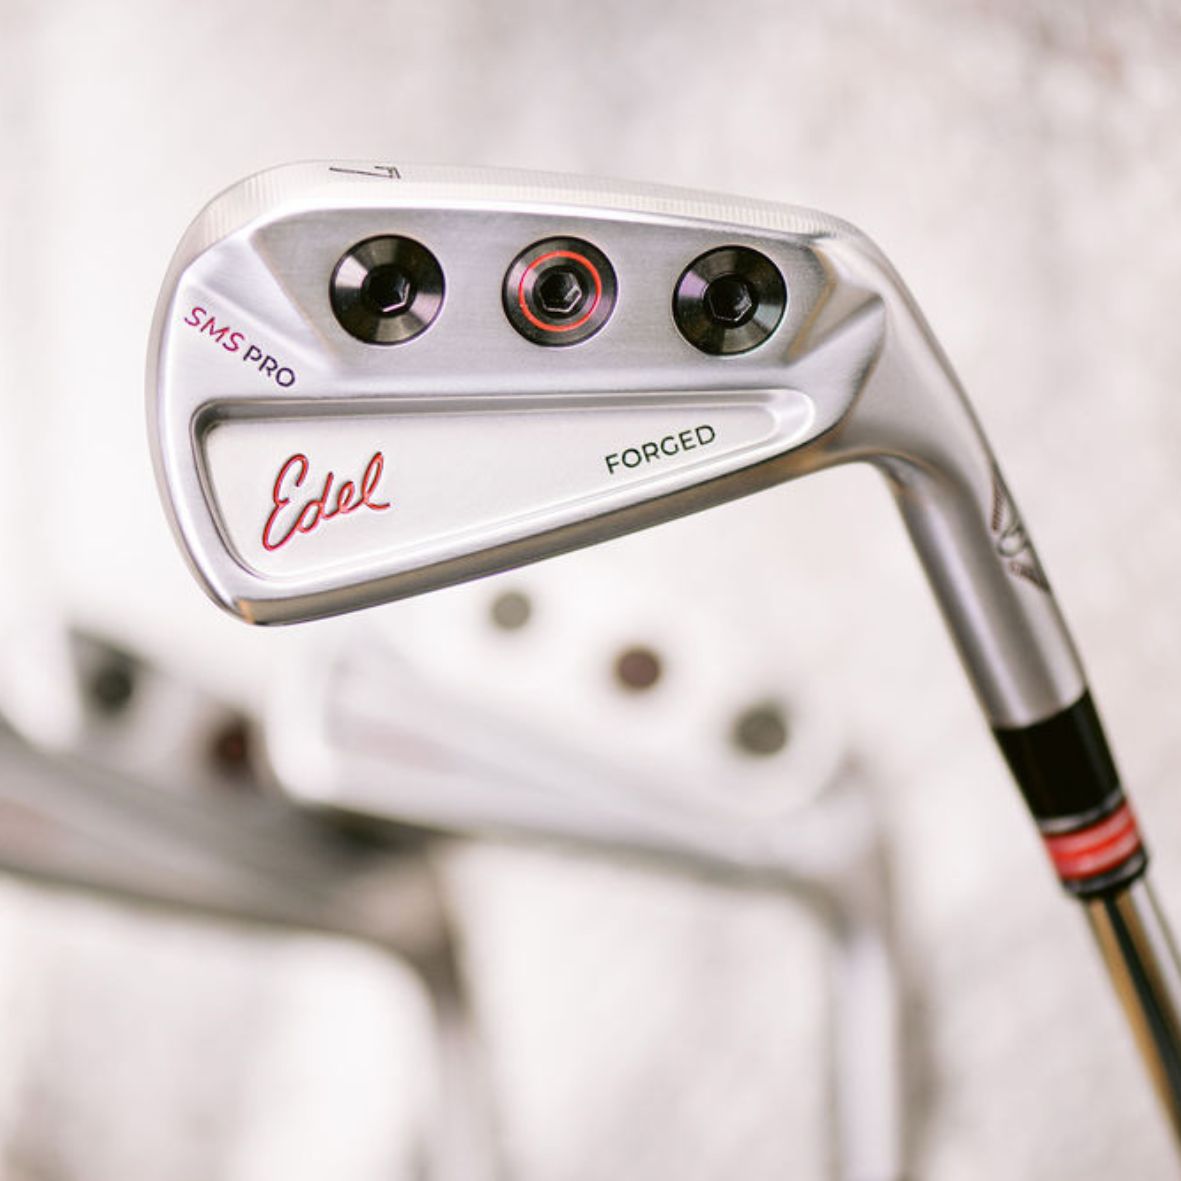 Edel SMS Pro Iron from Edel Golf Forged Blade